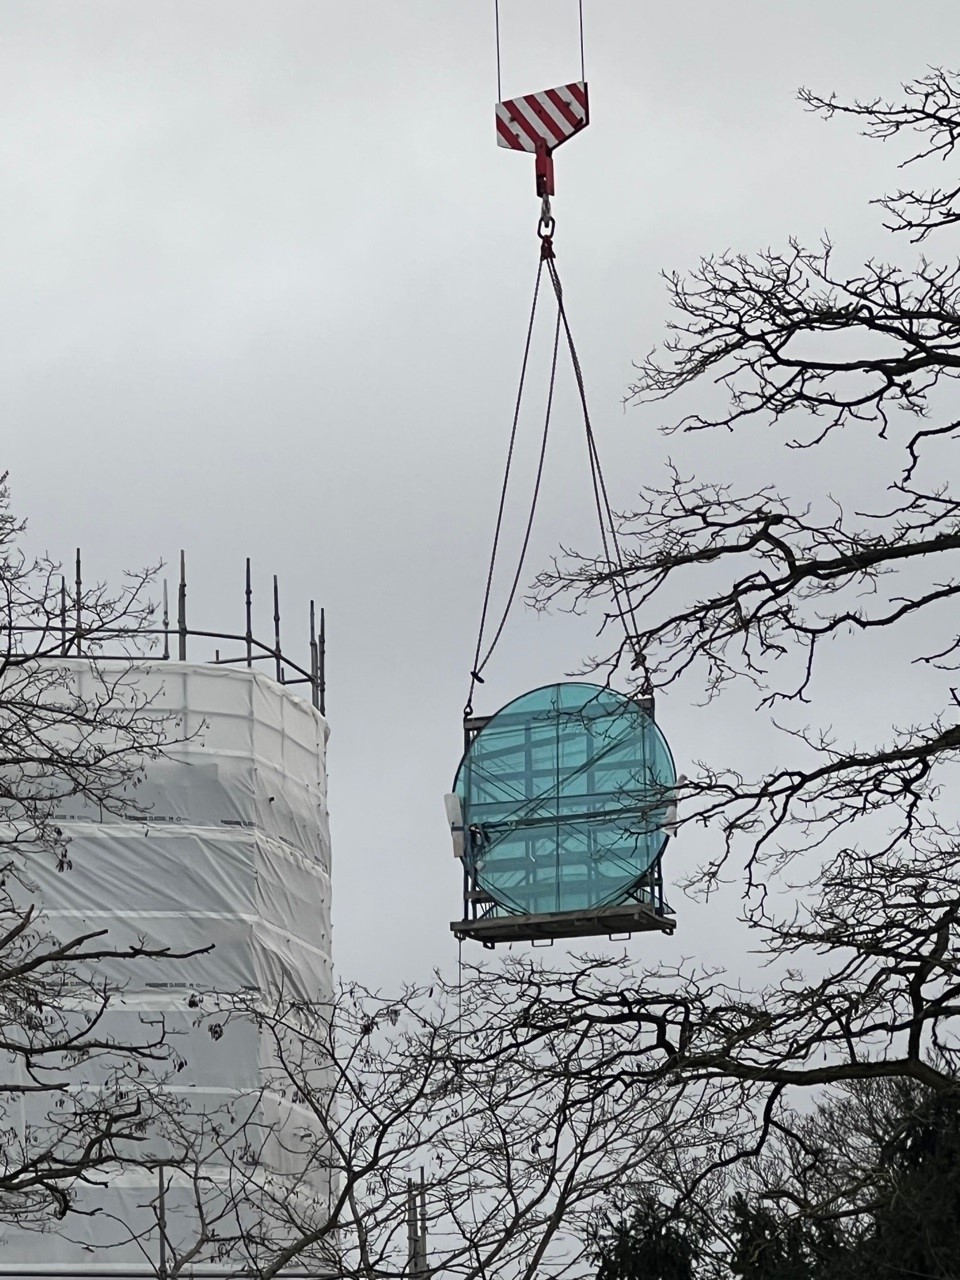 Crane lifting a large circular window up to the top of a nearby tower